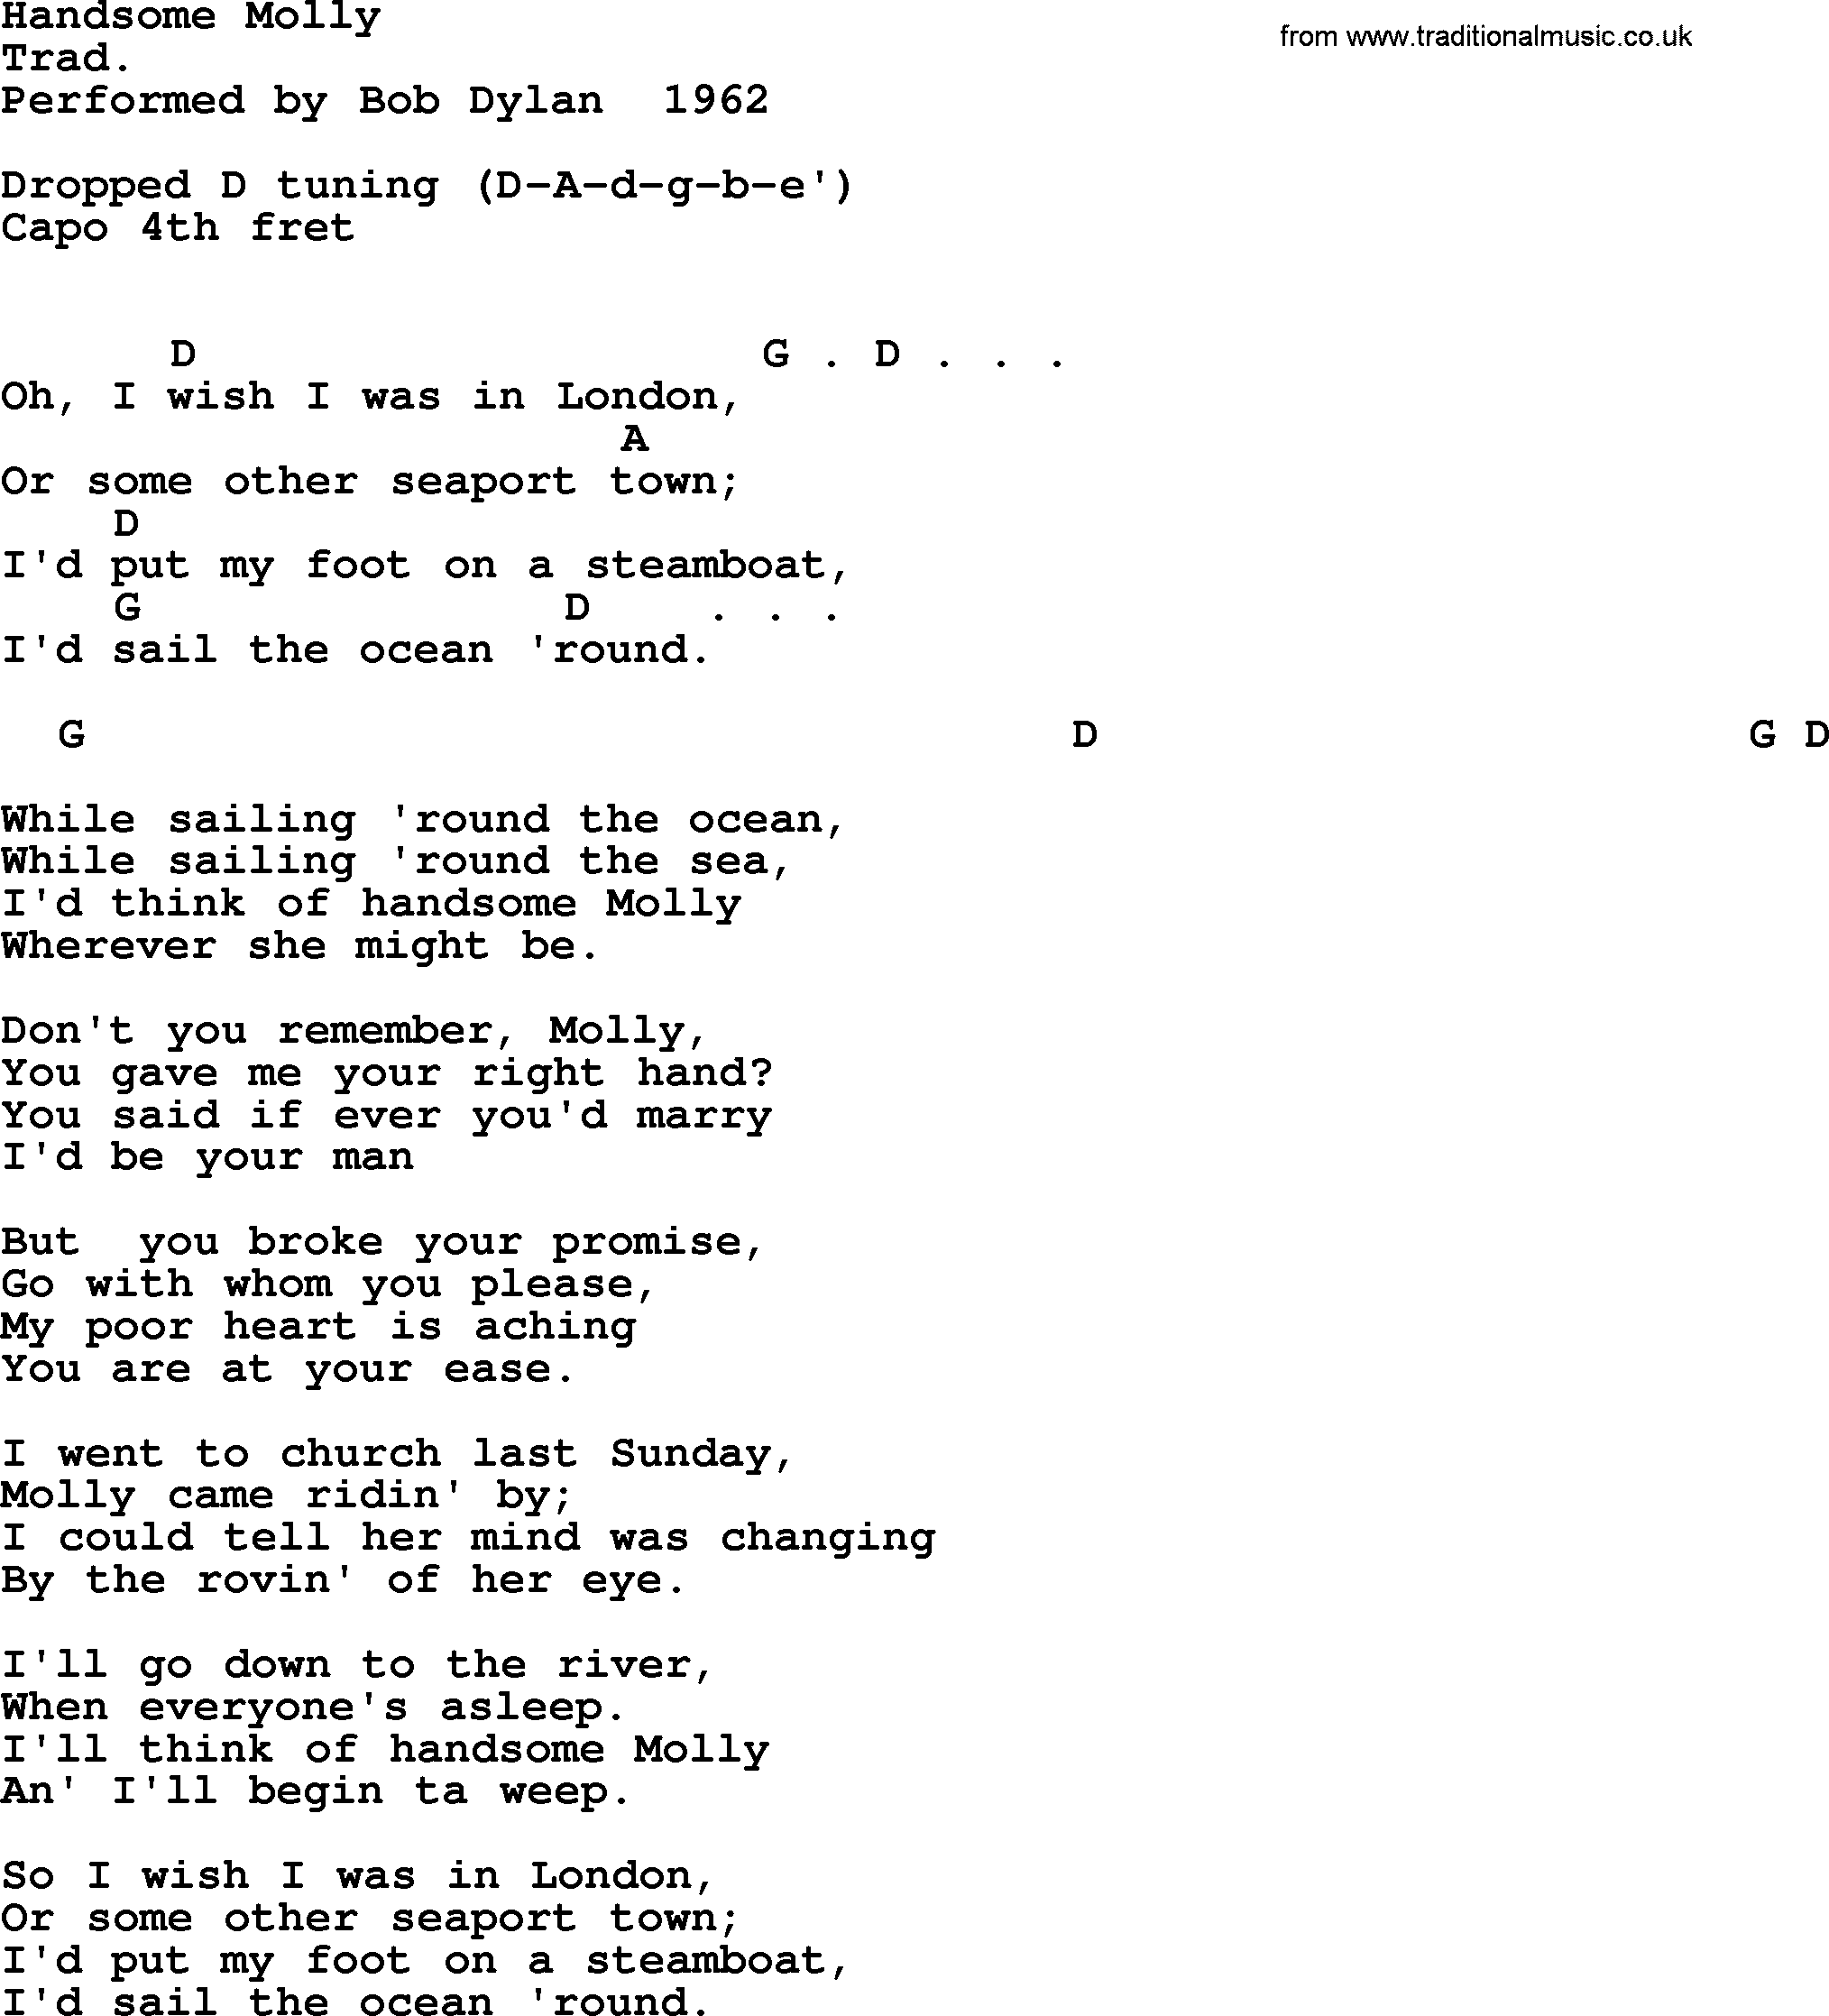 Bob Dylan song, lyrics with chords - Handsome Molly